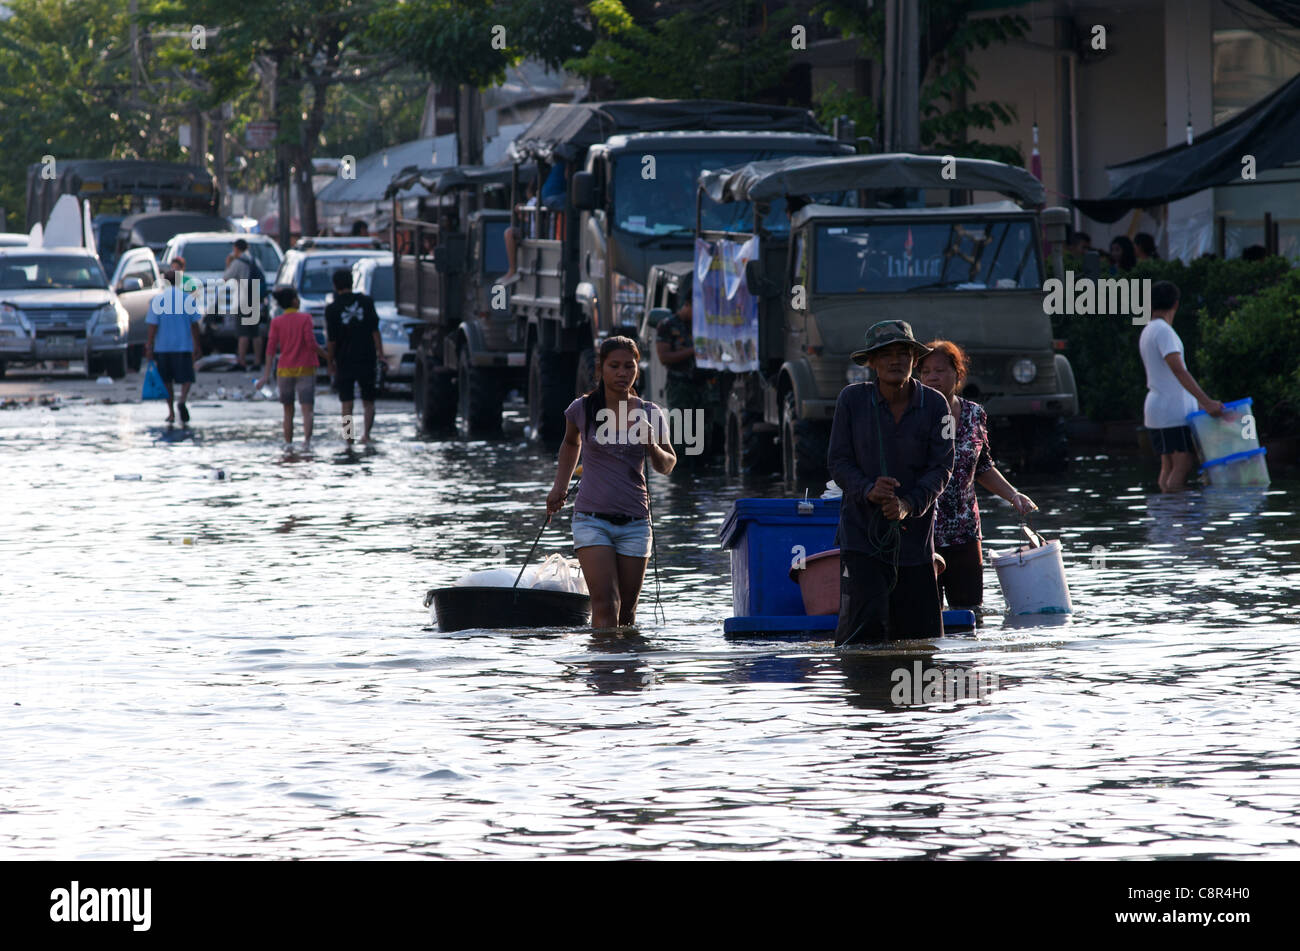 Thai refugees wade through flooding, Phahon Yothin Road, Bangkok, Thailand on Monday, October 31st, 2011. Thailand is experiencing its worst flooding in more than 50 years. credit: Kraig Lieb Stock Photo